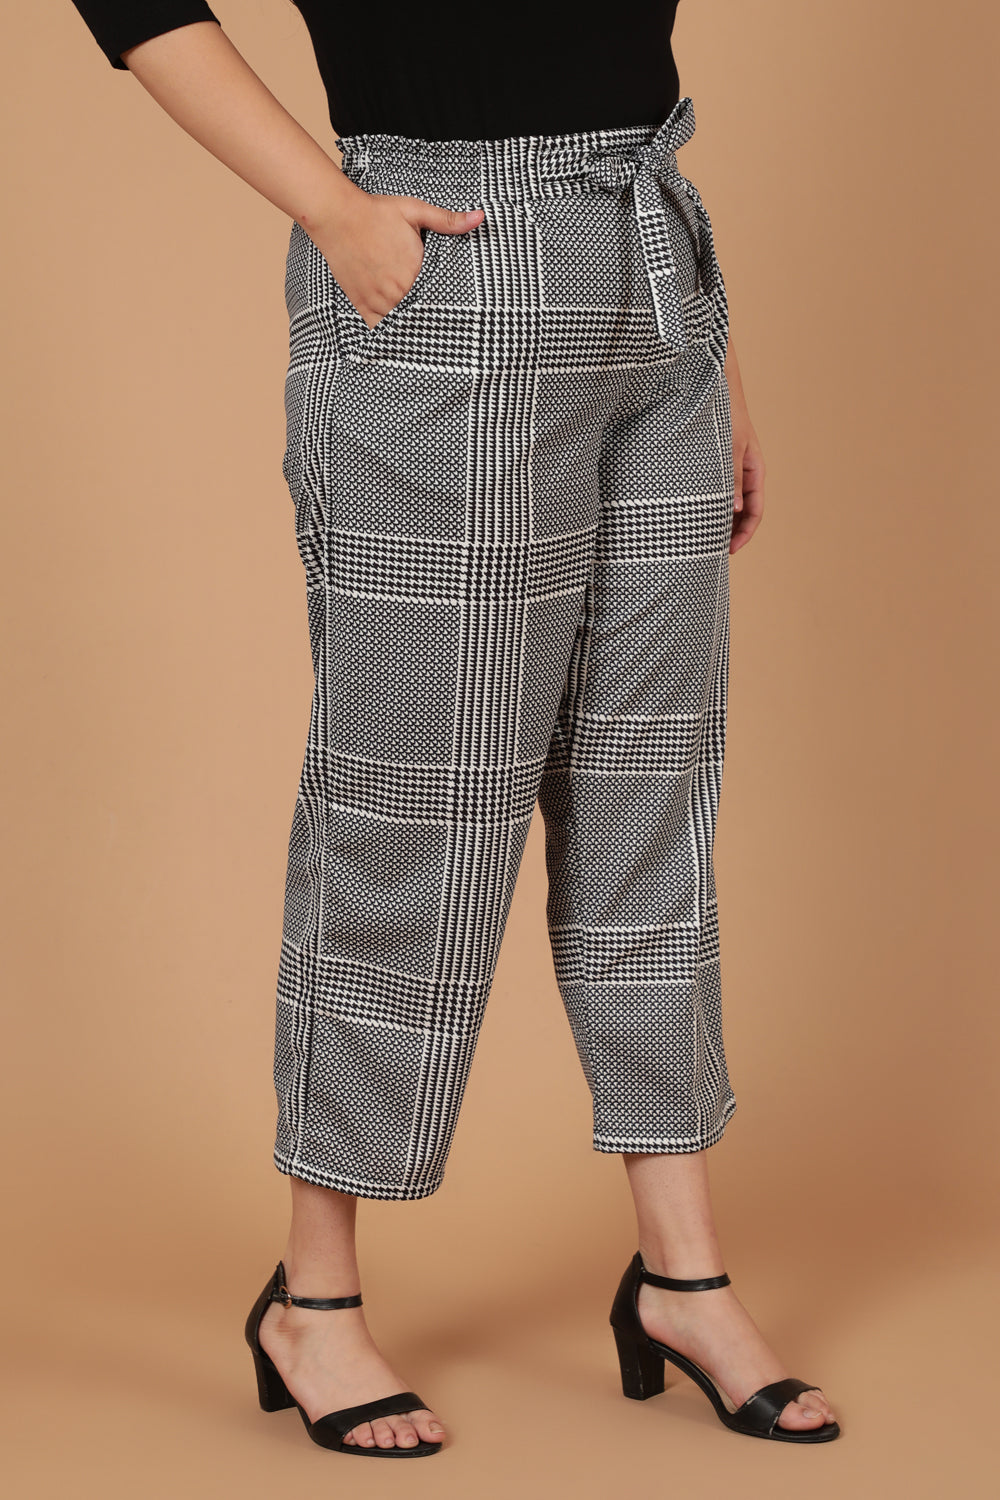 Black White Houndstooth Checkered Pants for Women